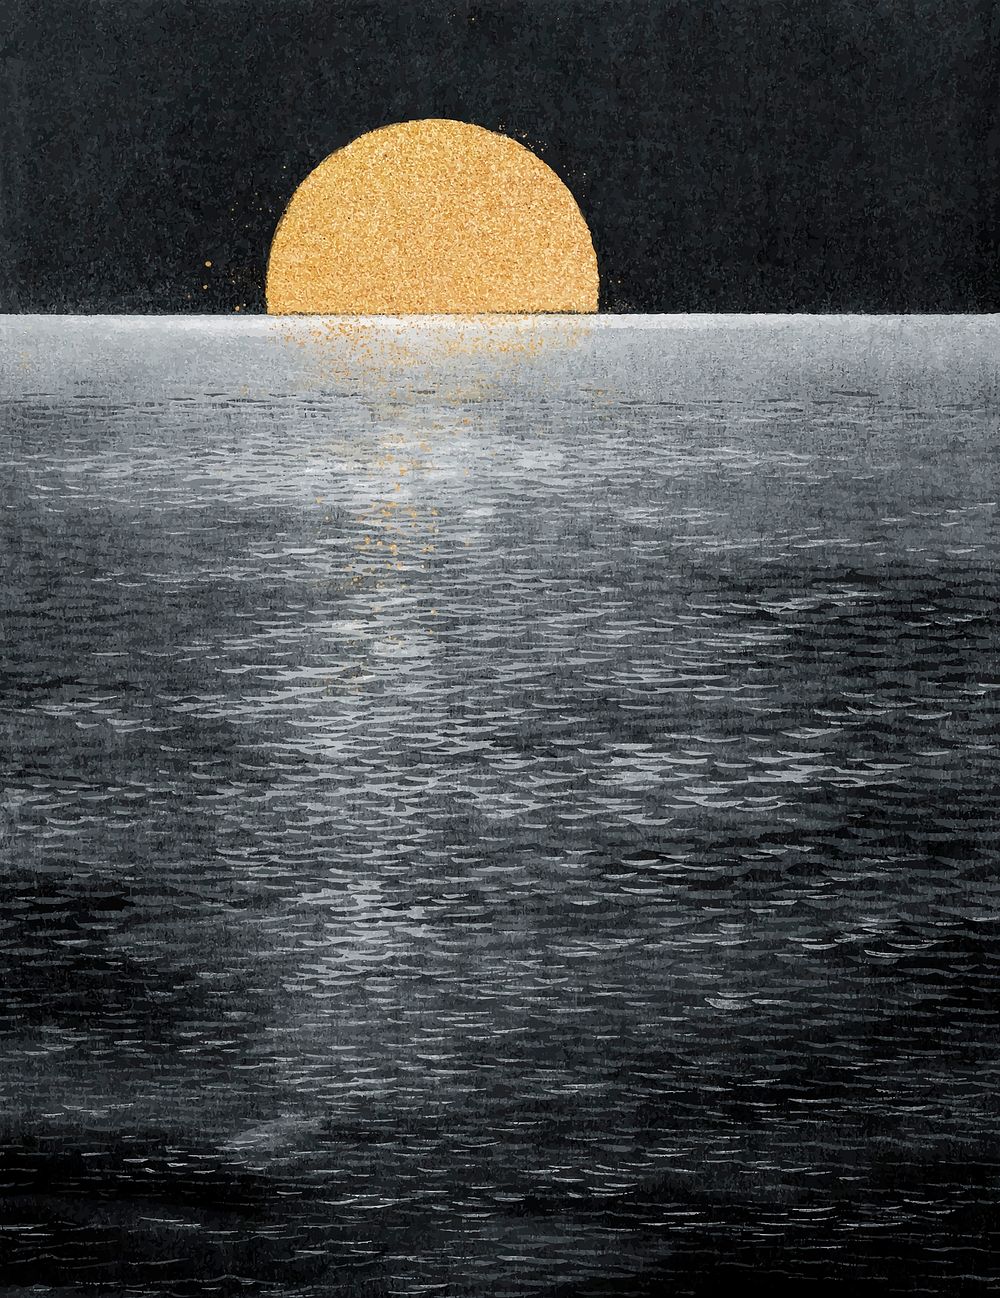 Moon rising over the sea vintage illustration vector, remix from original artwork.